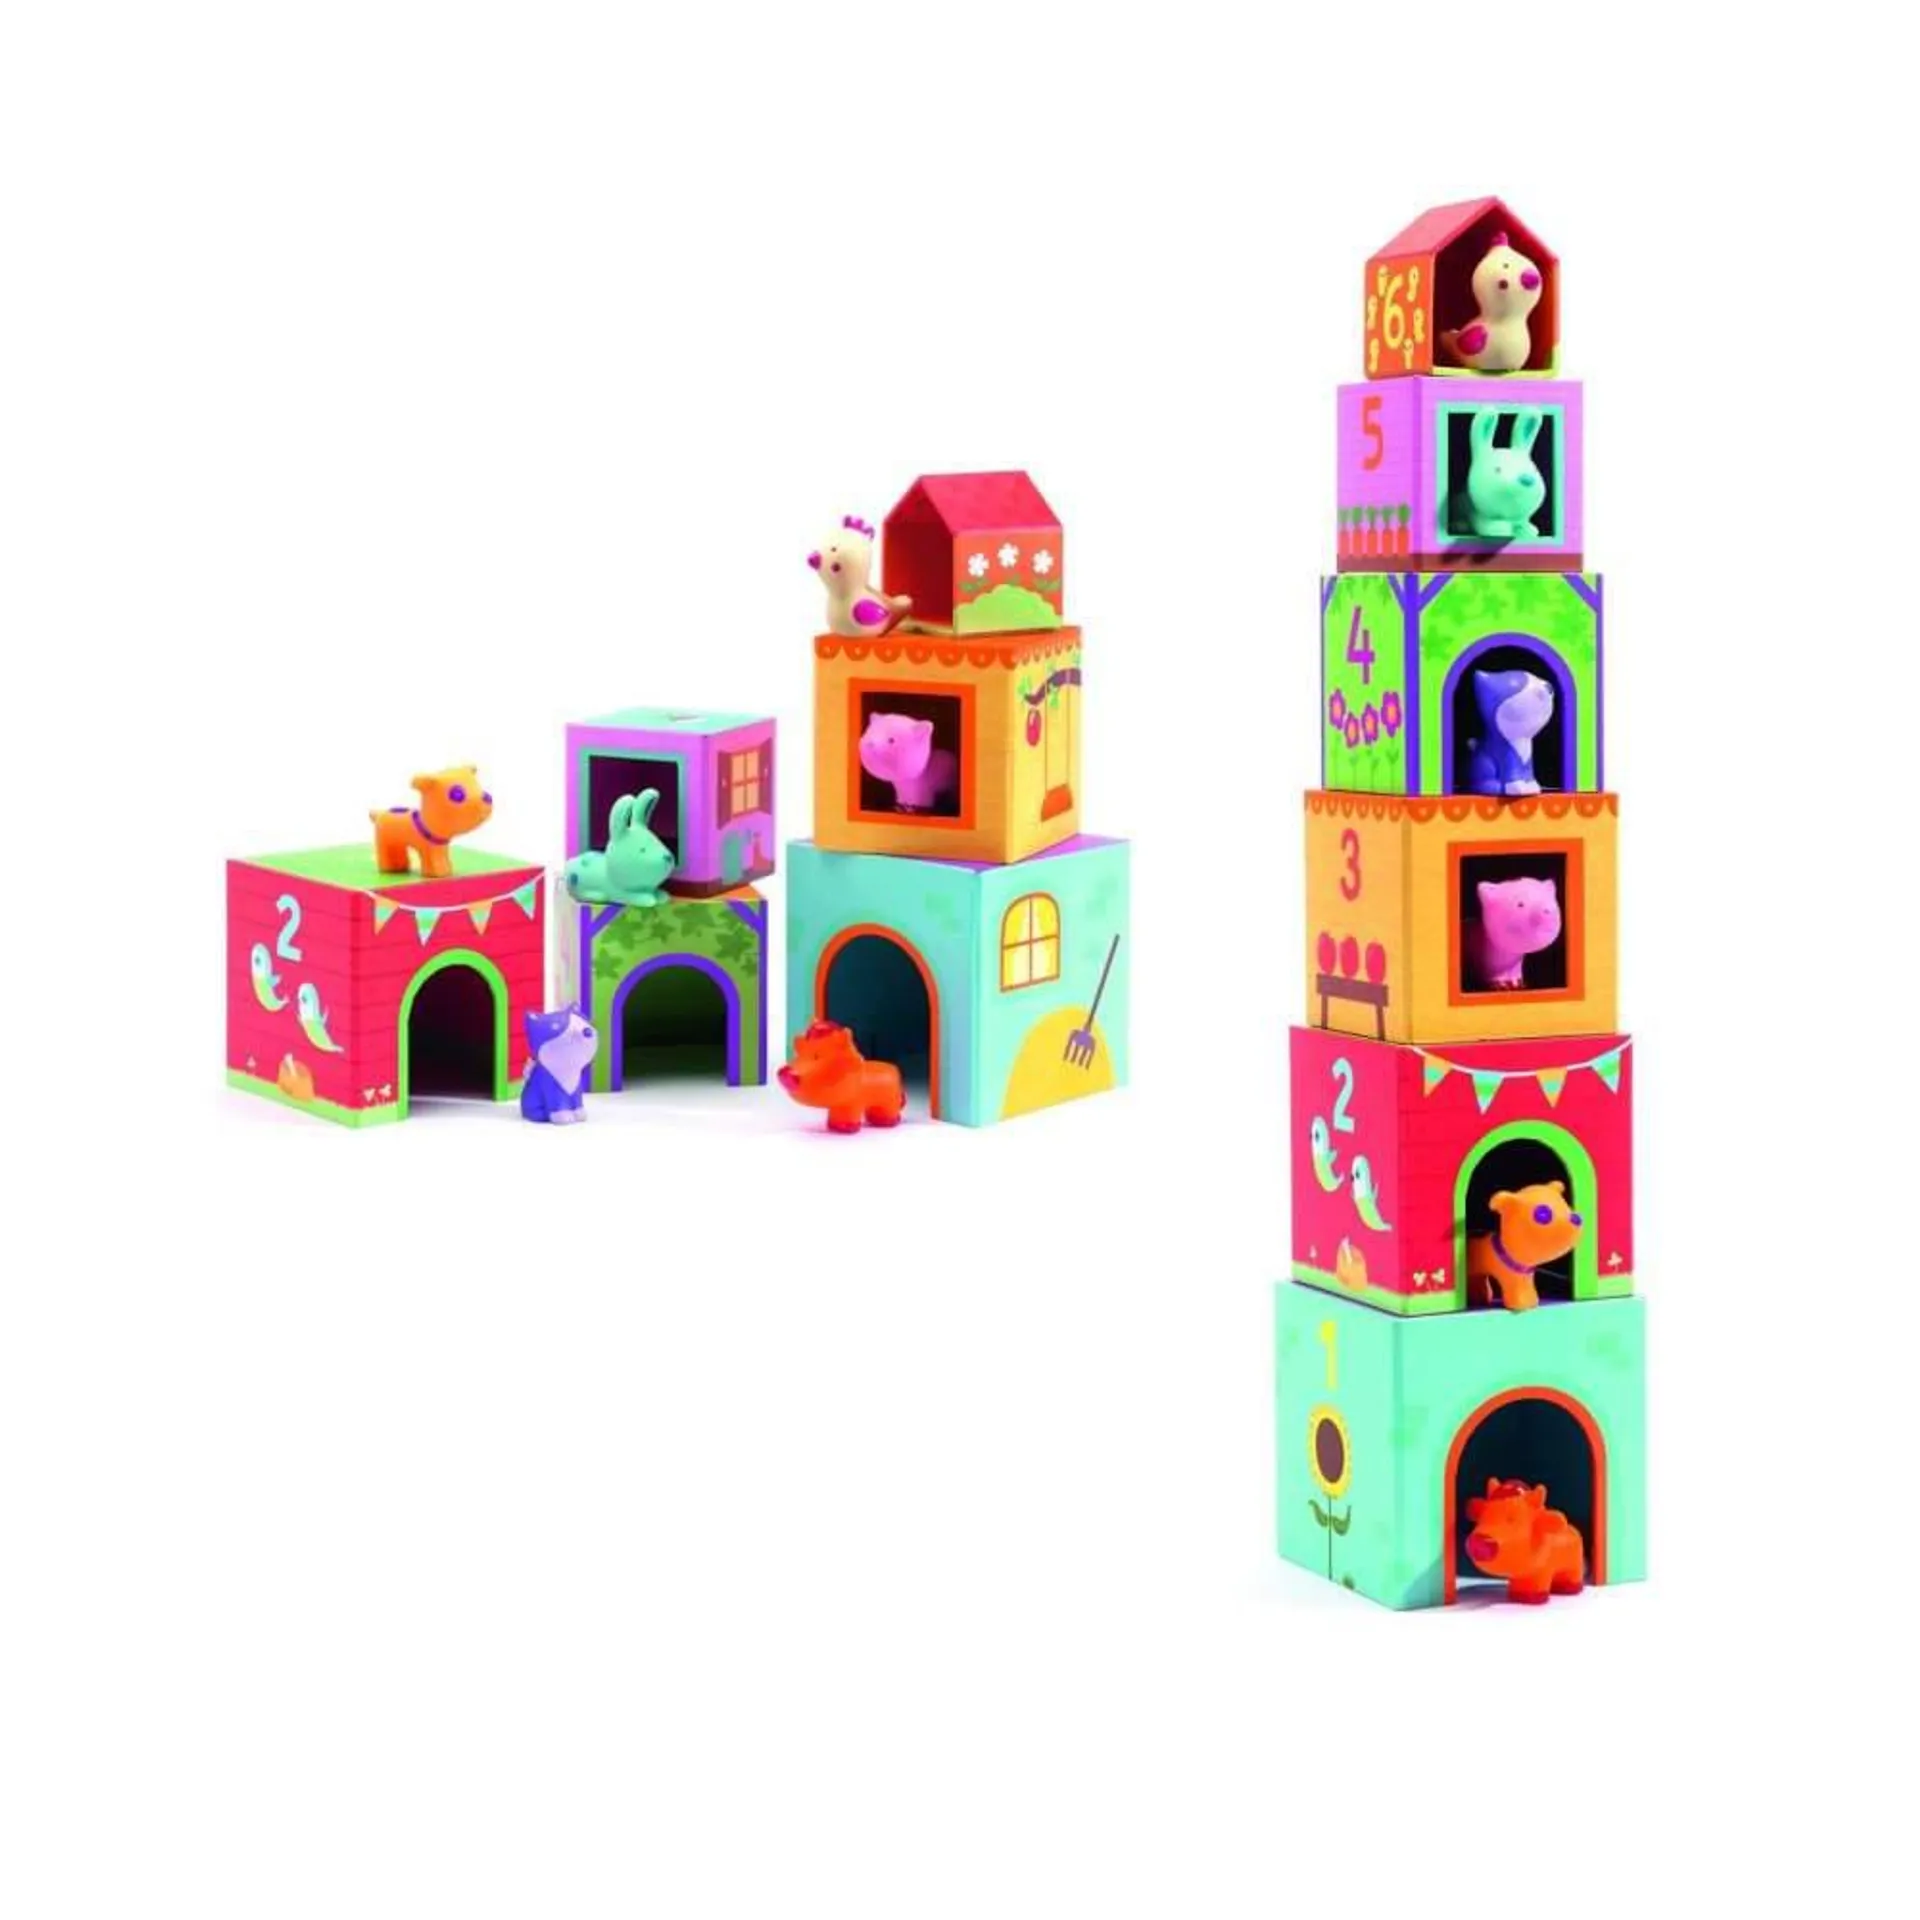 Djeco Topanifarm Stacking Cubes for infants